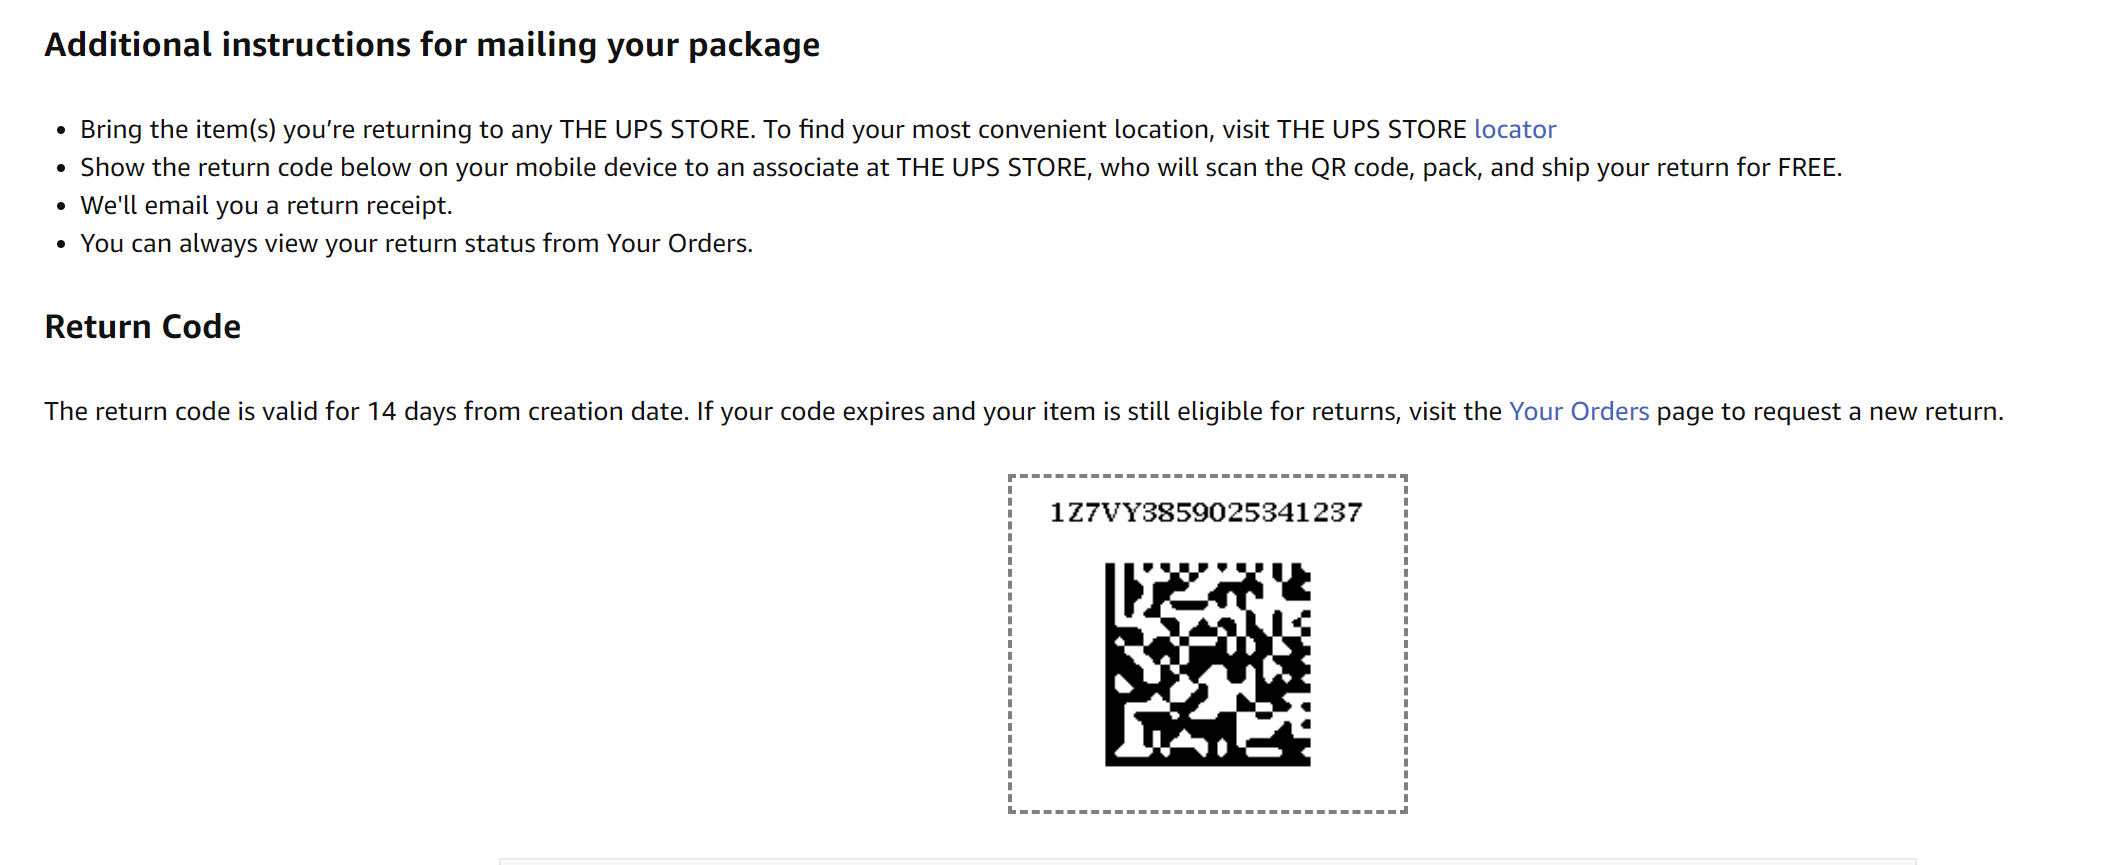 a qr code on a package